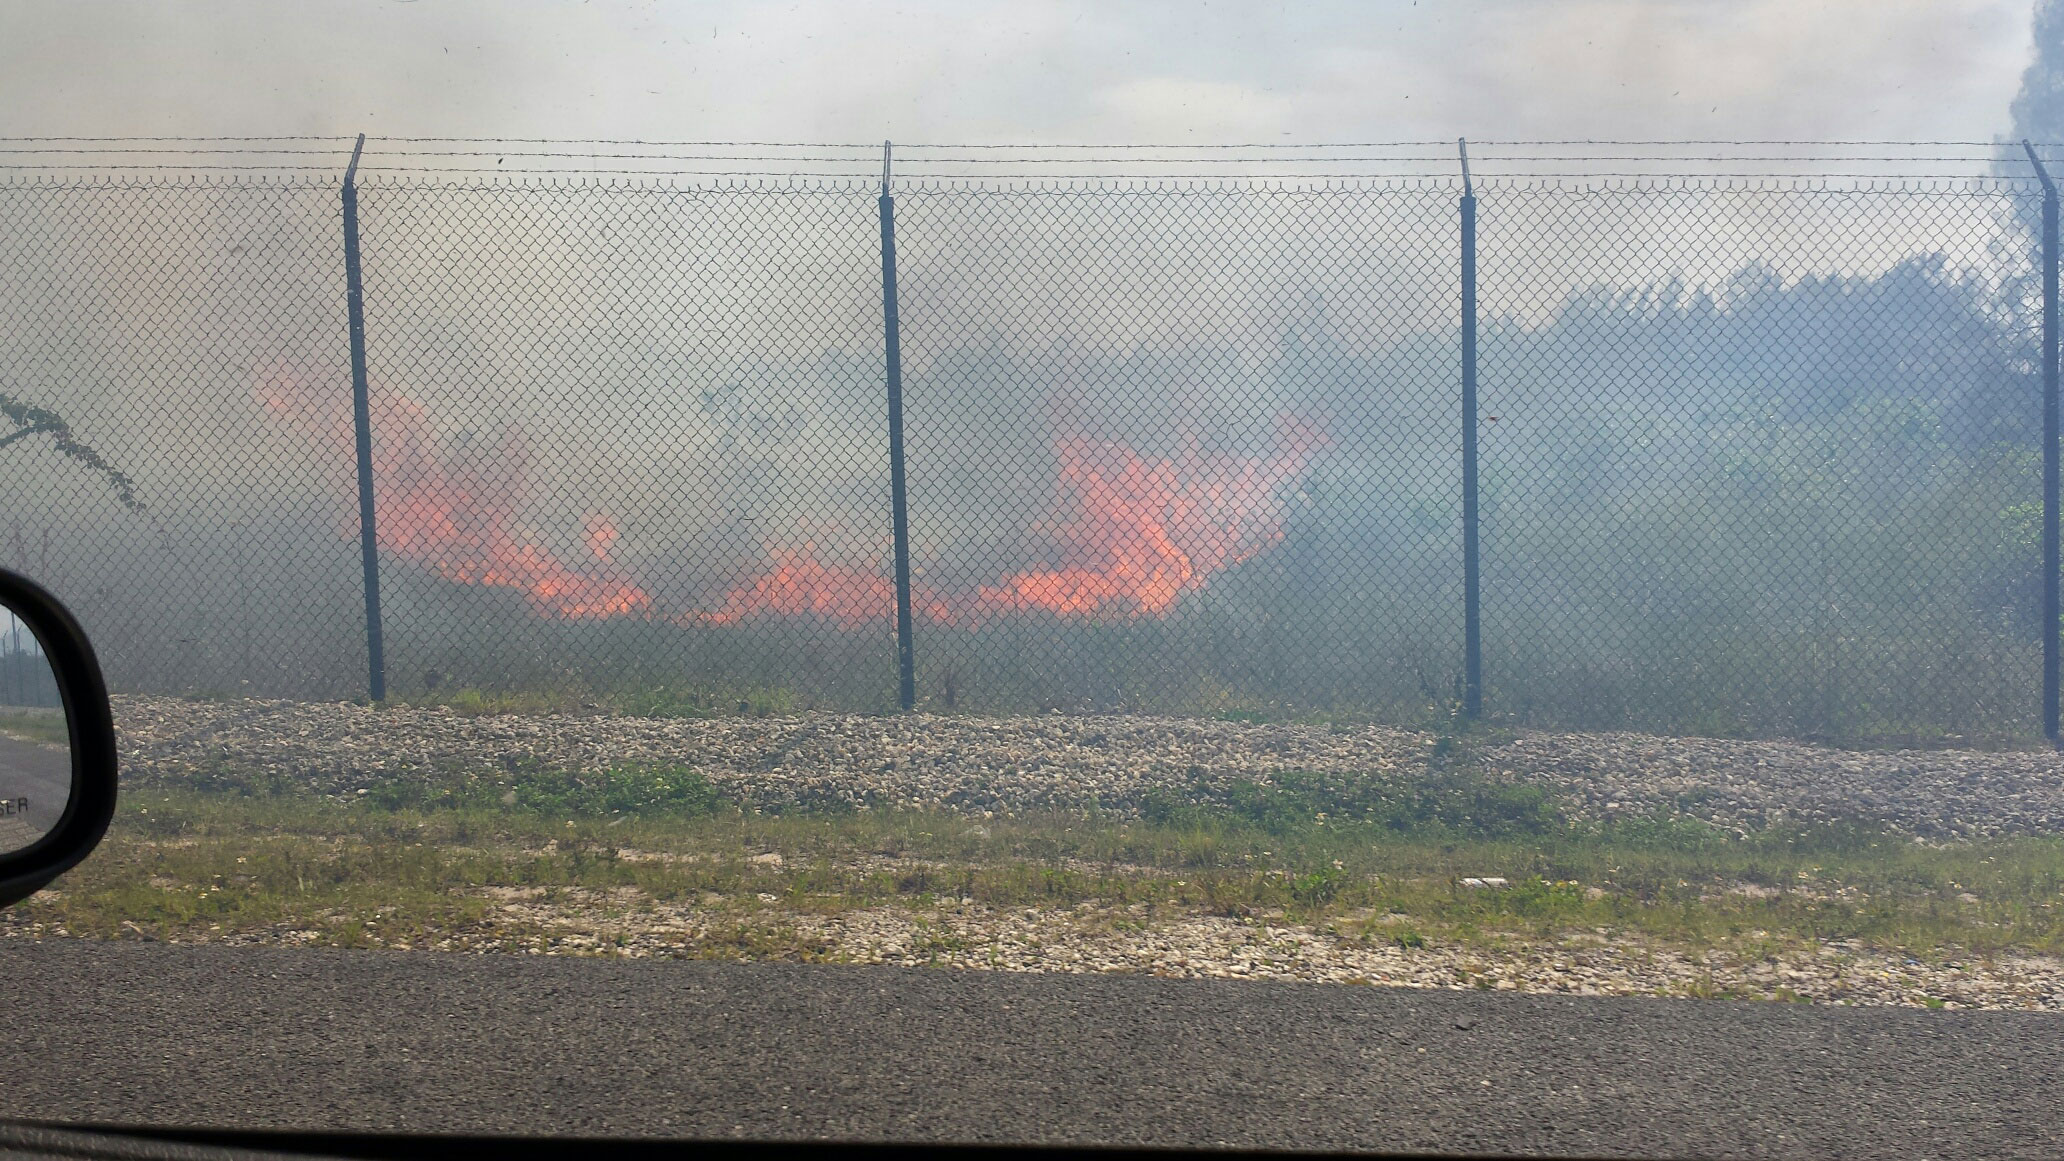 May 17, 2014: A brush  fire forced the closure of U.S. 1 in both directions. (Source: Lt. Al Ramirez, MCSO)